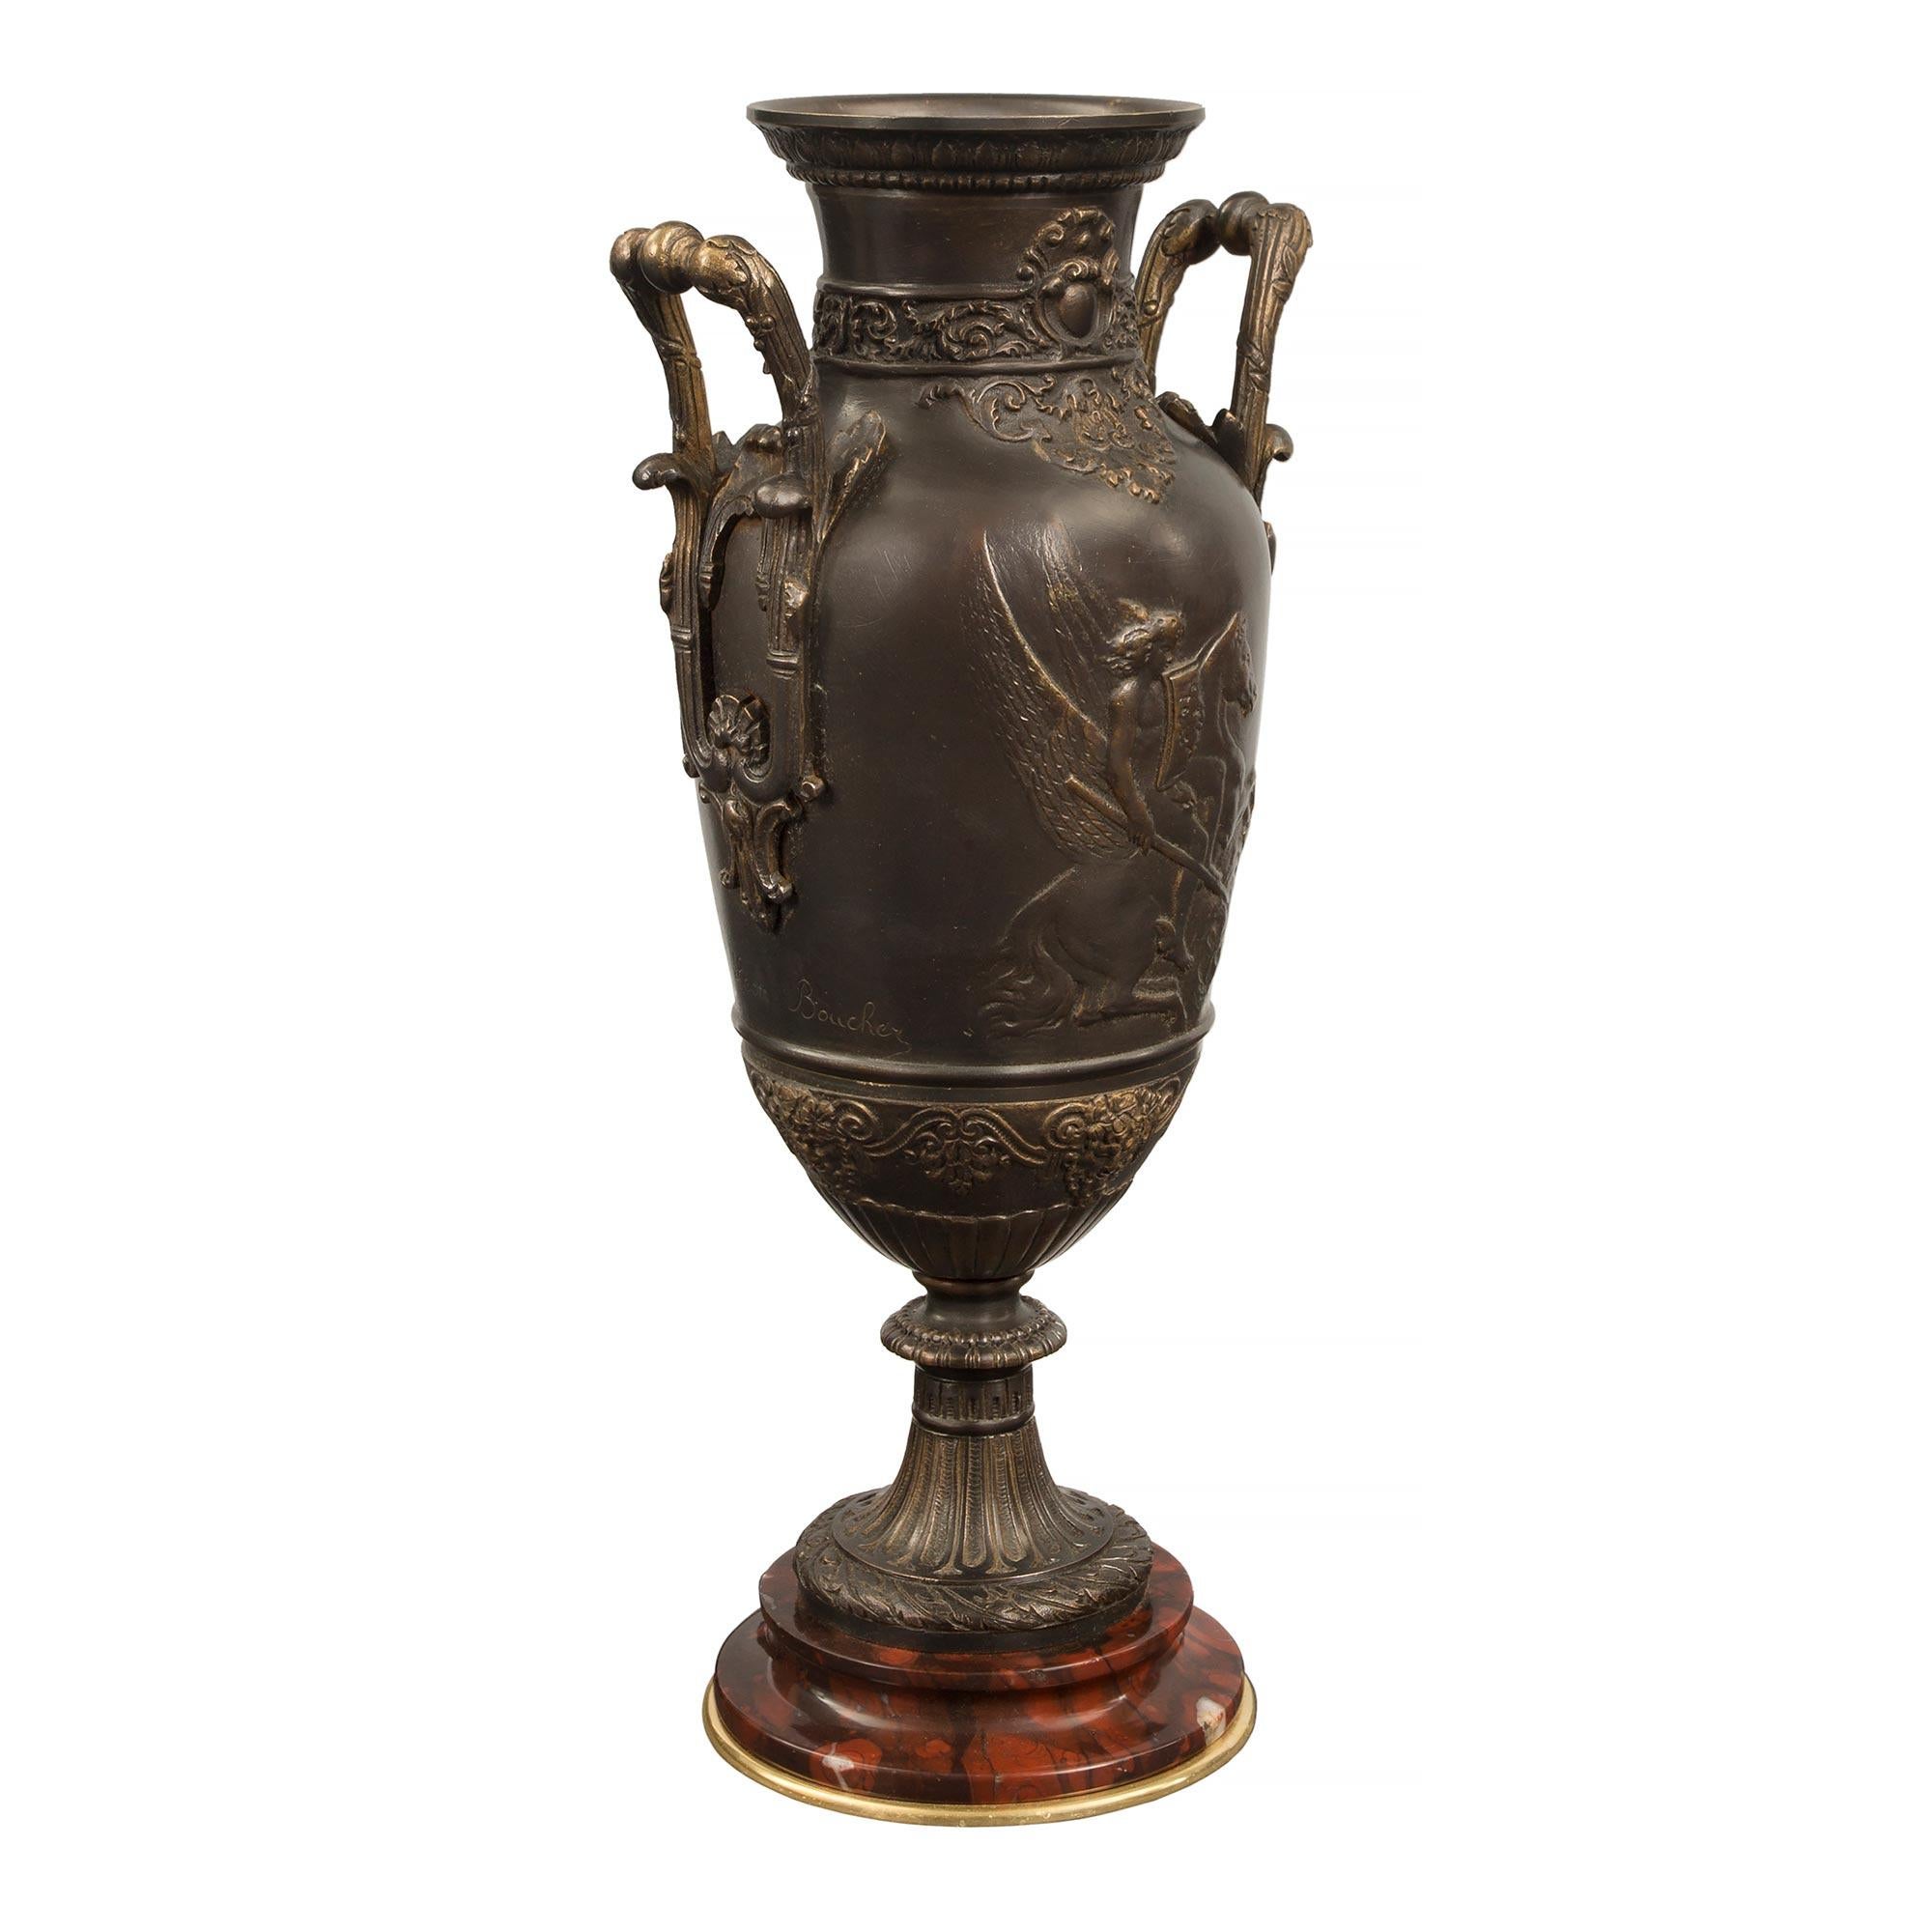 A handsome pair of French 19th century Renaissance st. patinated bronze, ormolu and Rouge Griotte marble urns, signed Leon Boucher. Each urn is raised by a circular mottled Rouge Griotte marble base with a fine ormolu bottom band. The socle